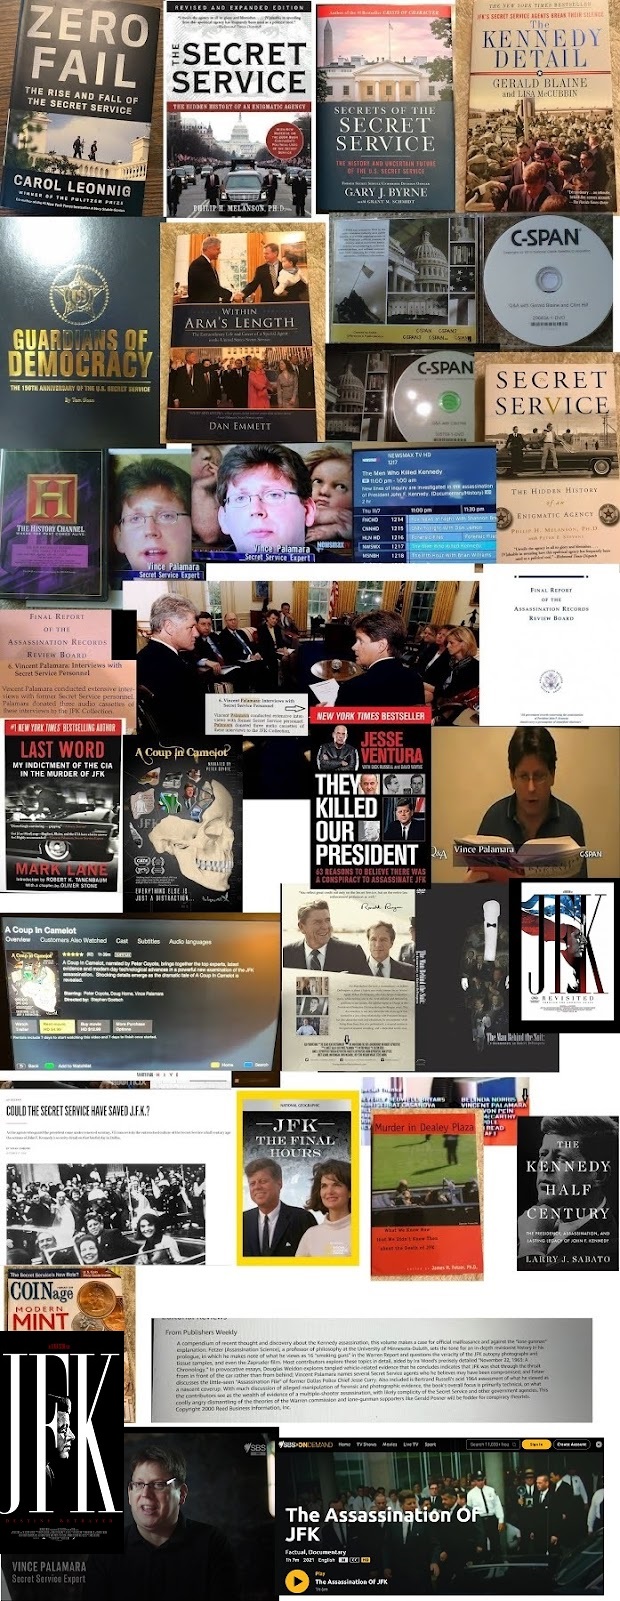 MAJOR SECRET SERVICE RELATED BOOKS/DVDs/BLU RAYS I AM REFERENCED IN